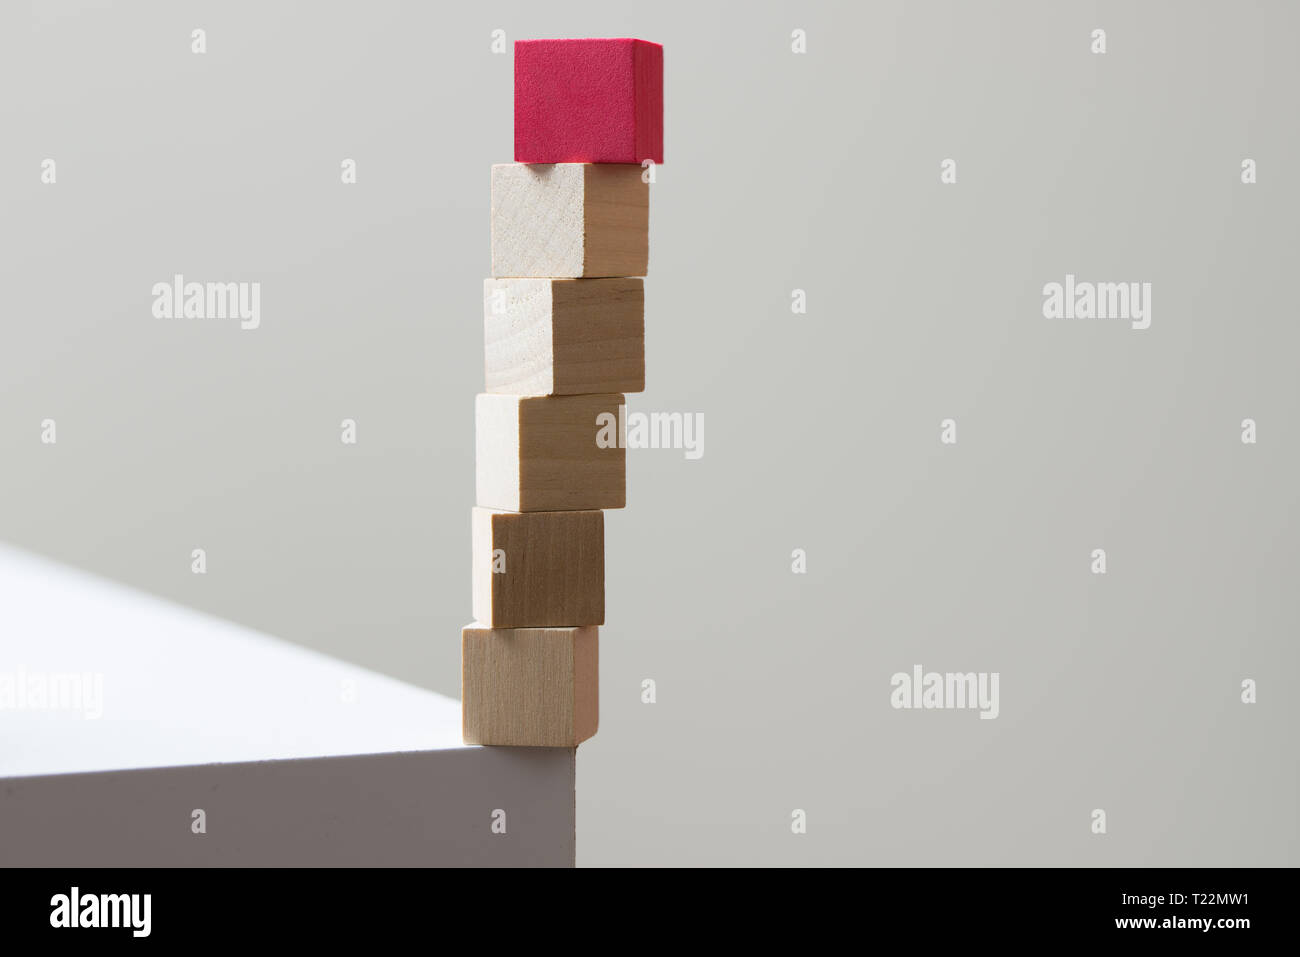 Wooden cubes in balance at the edge of the table for risk concept Stock Photo